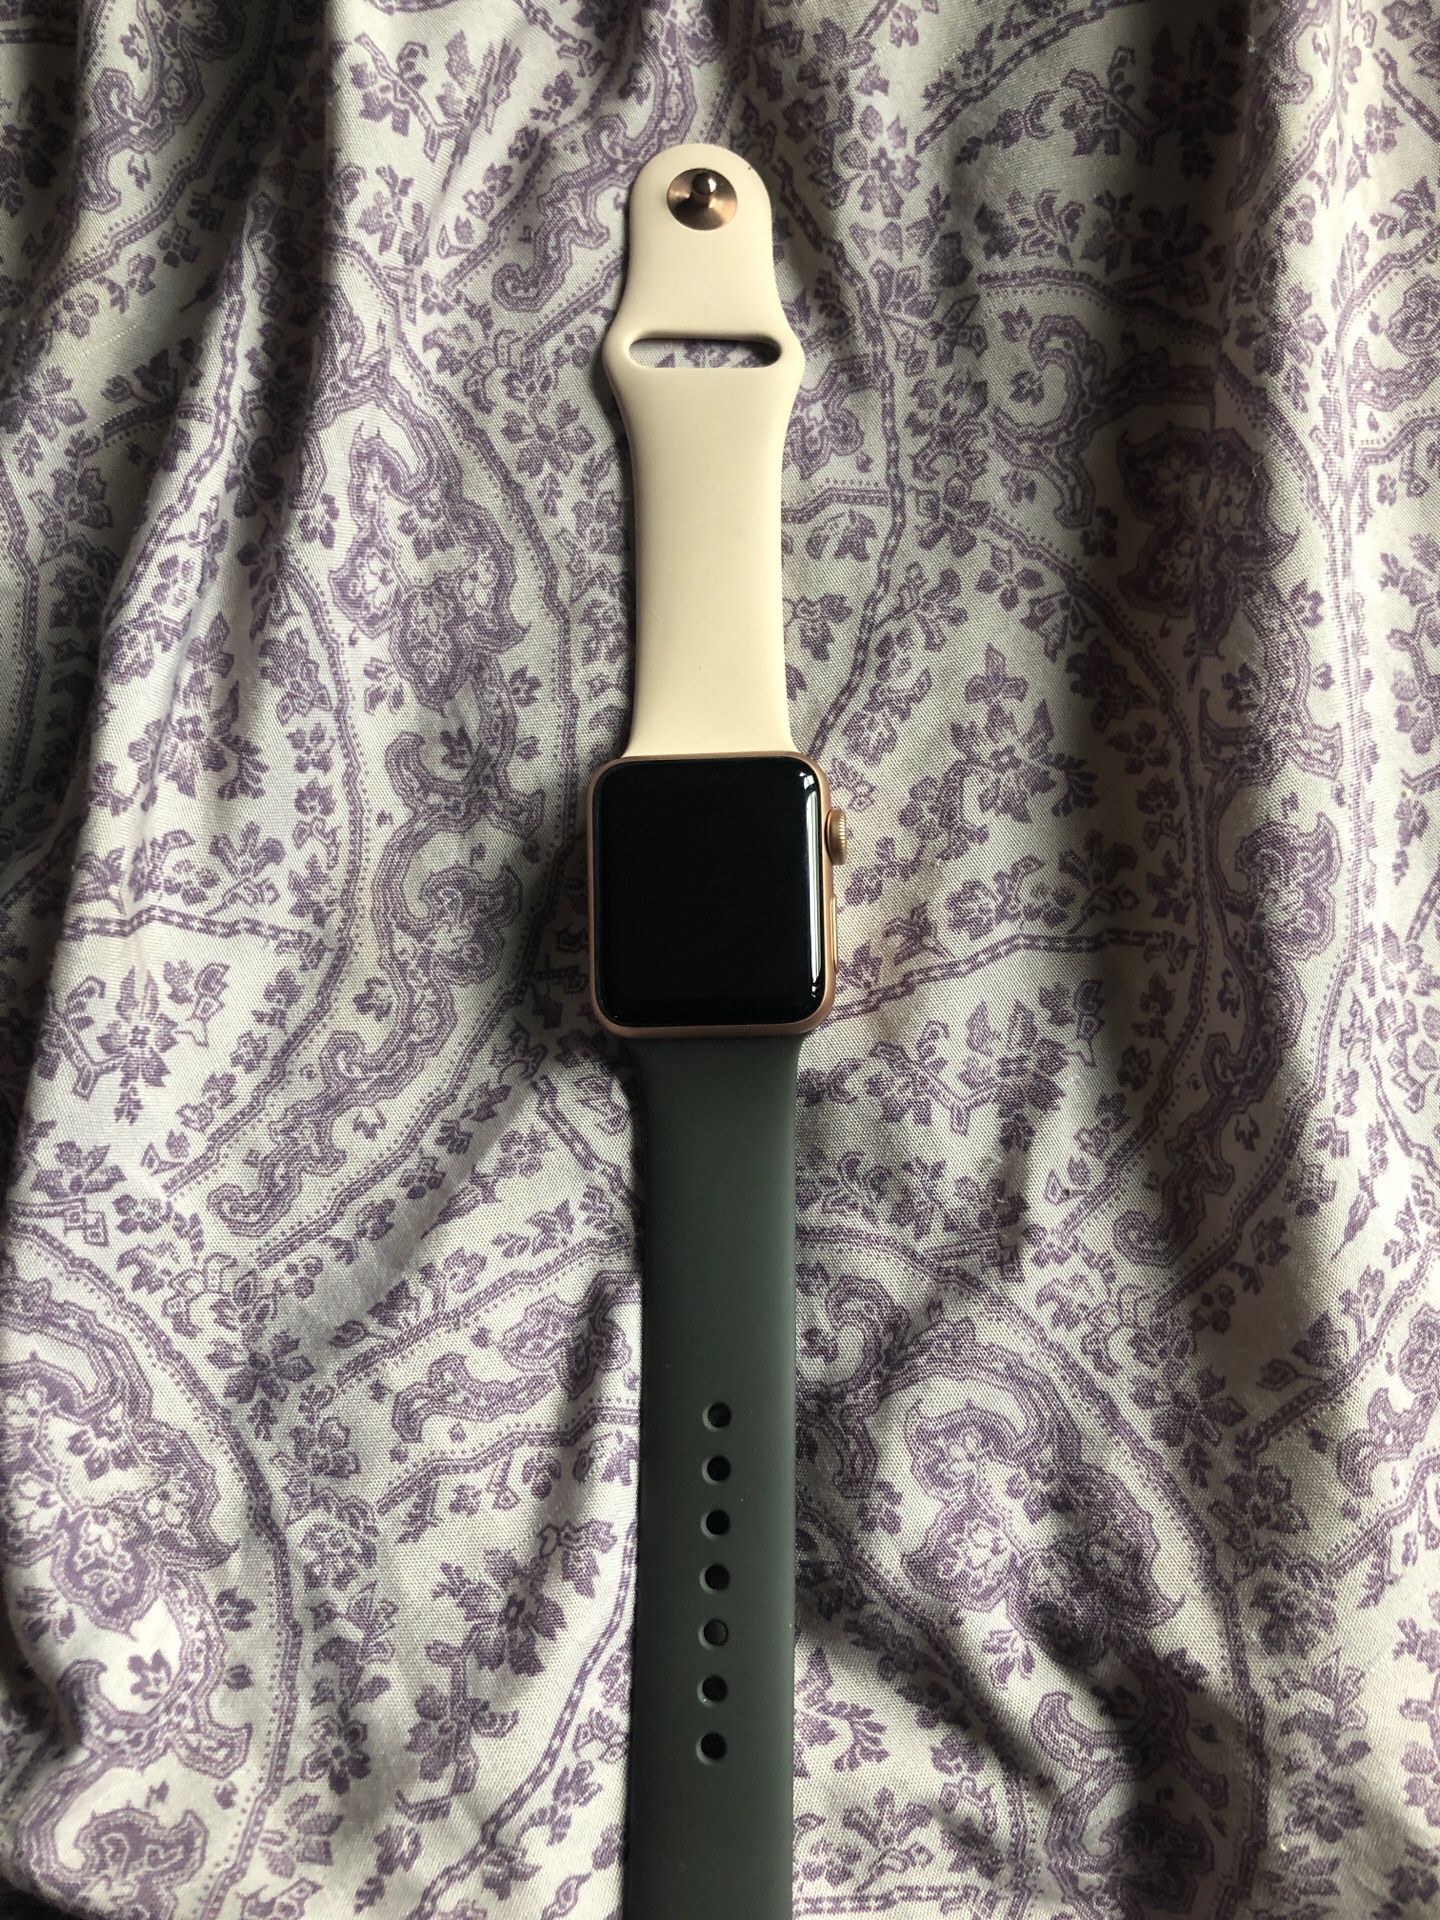 Apple watch 3 series 38 mm with Lte